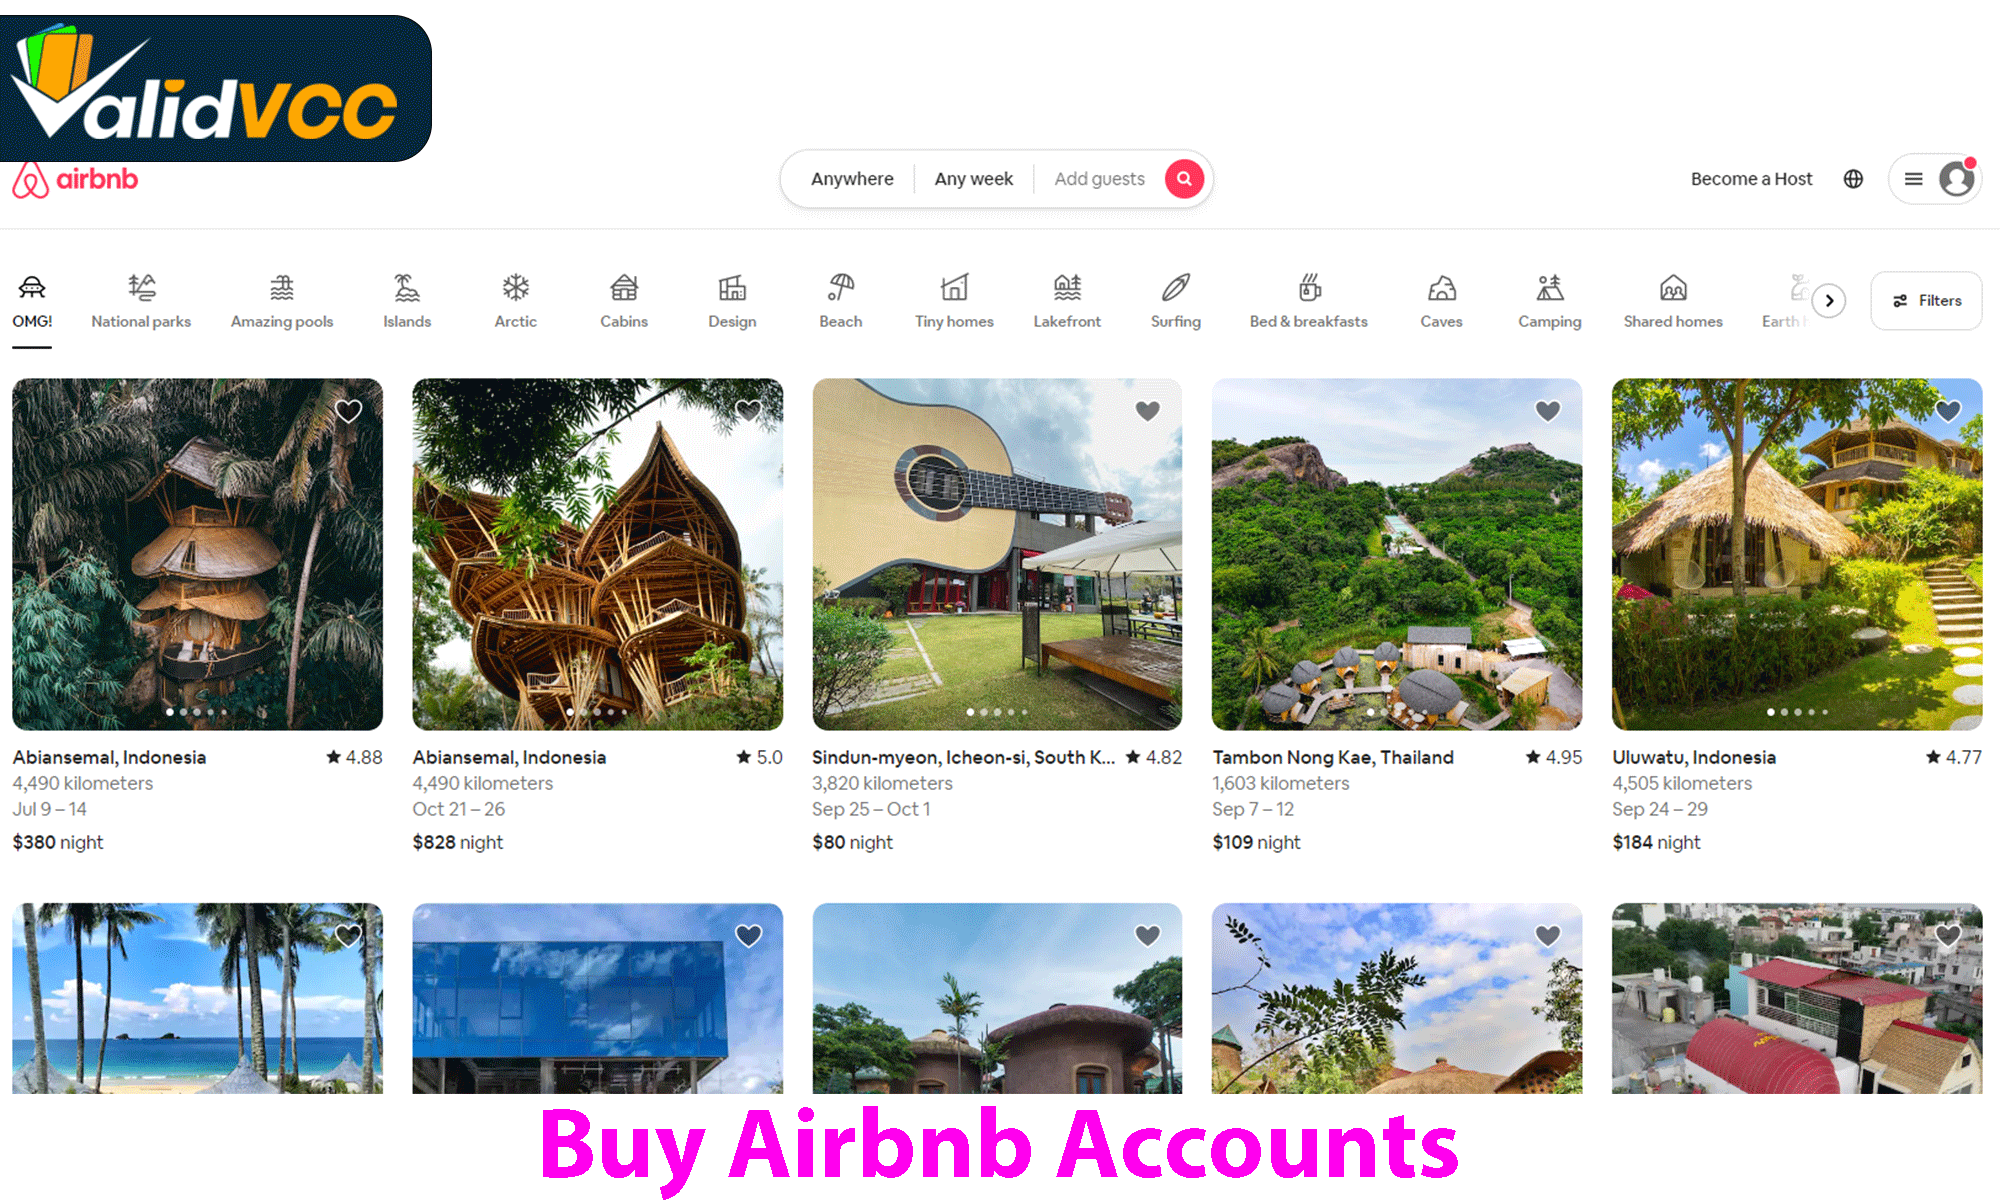 buy Airbnb account, buy verified Airbnb account, Airbnb account for sale, best Airbnb account, Airbnb account to buy,